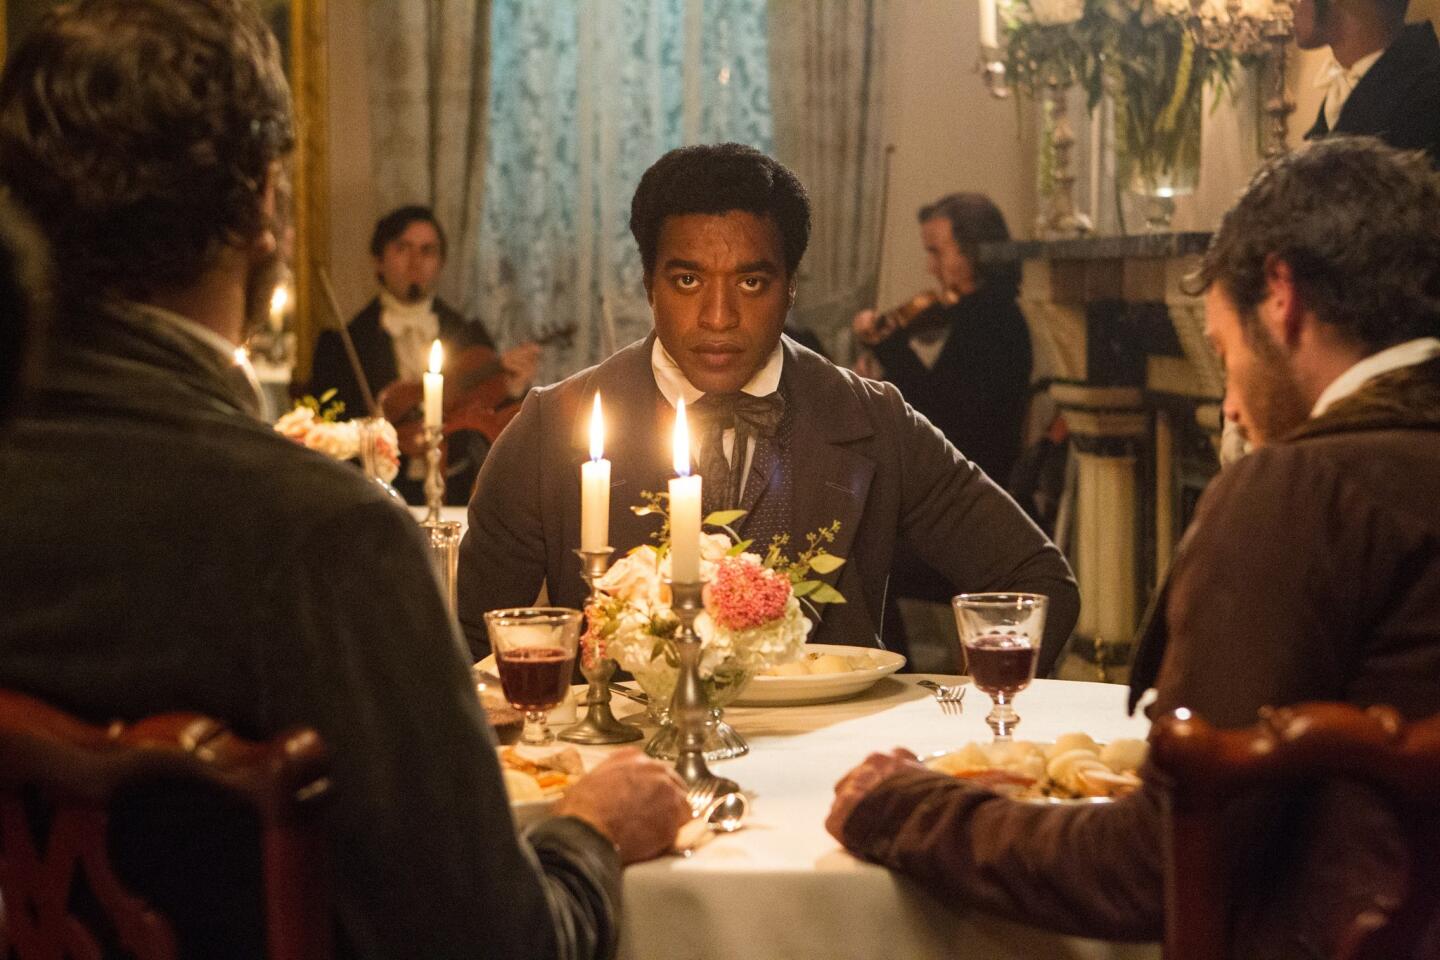 The drama is based on the 1853 autobiography "Twelve Years a Slave" by Solomon Northup